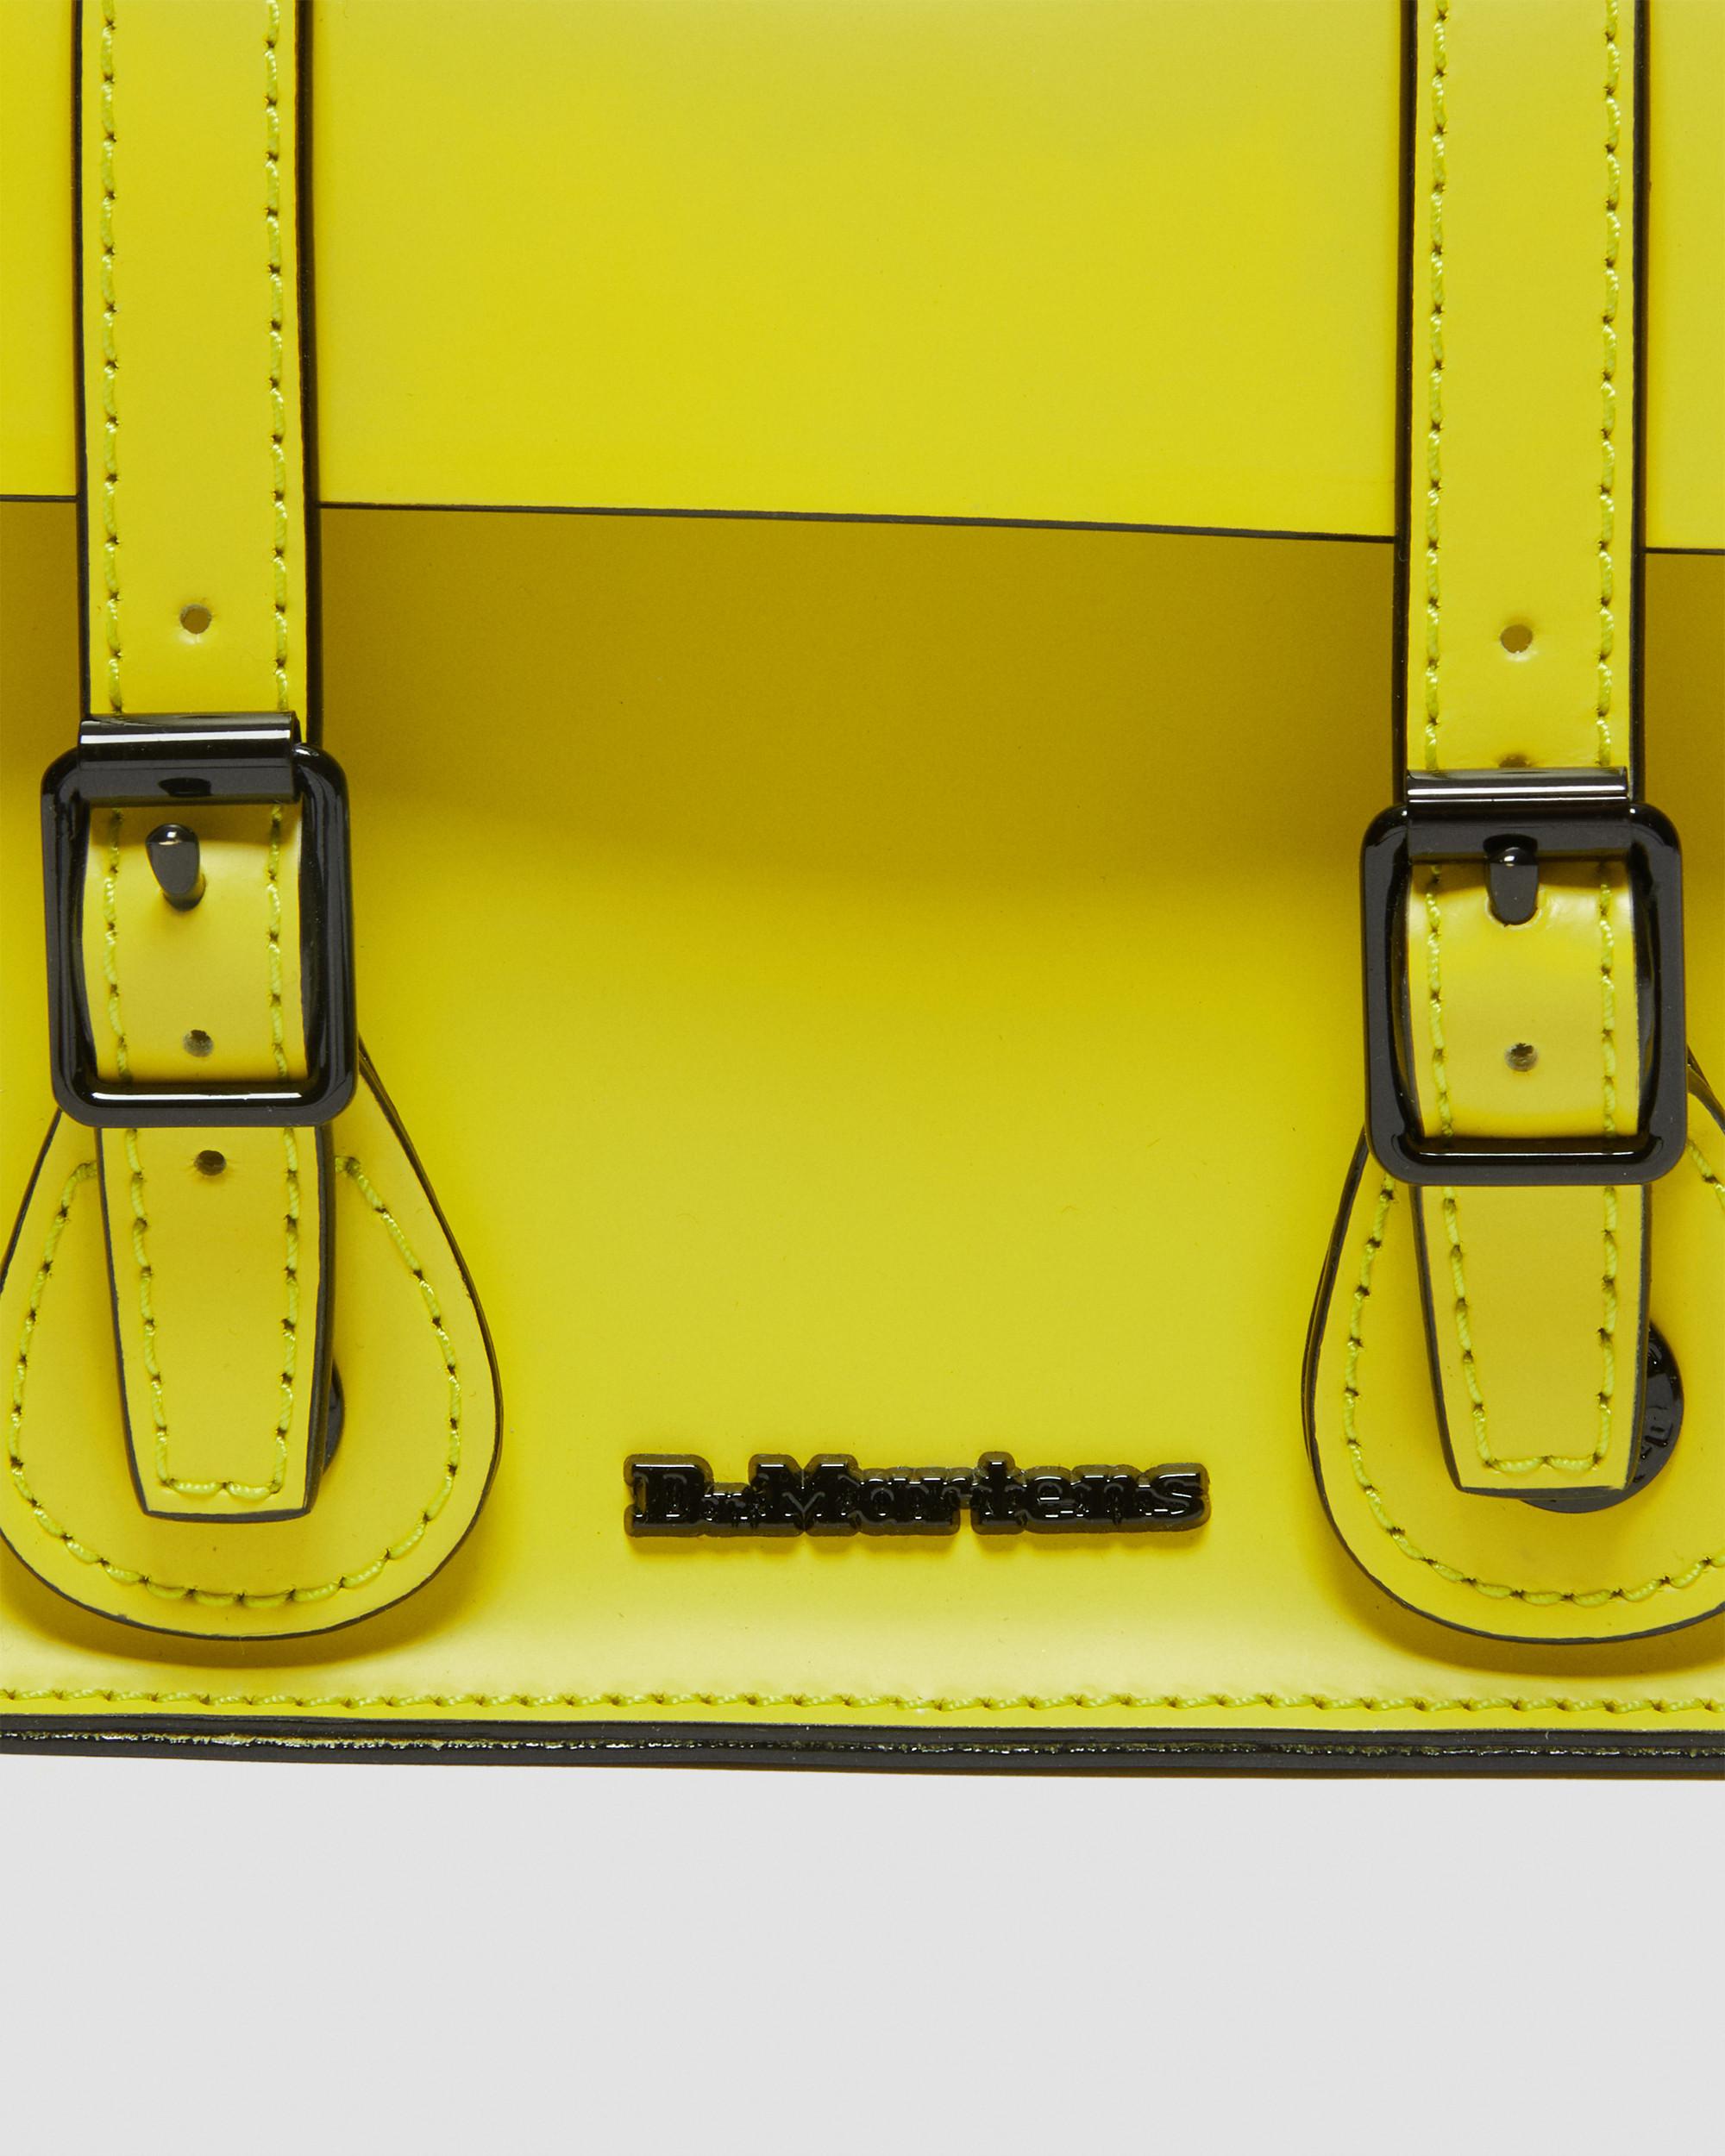 Dr. Martens purse/wallet in black and yellow